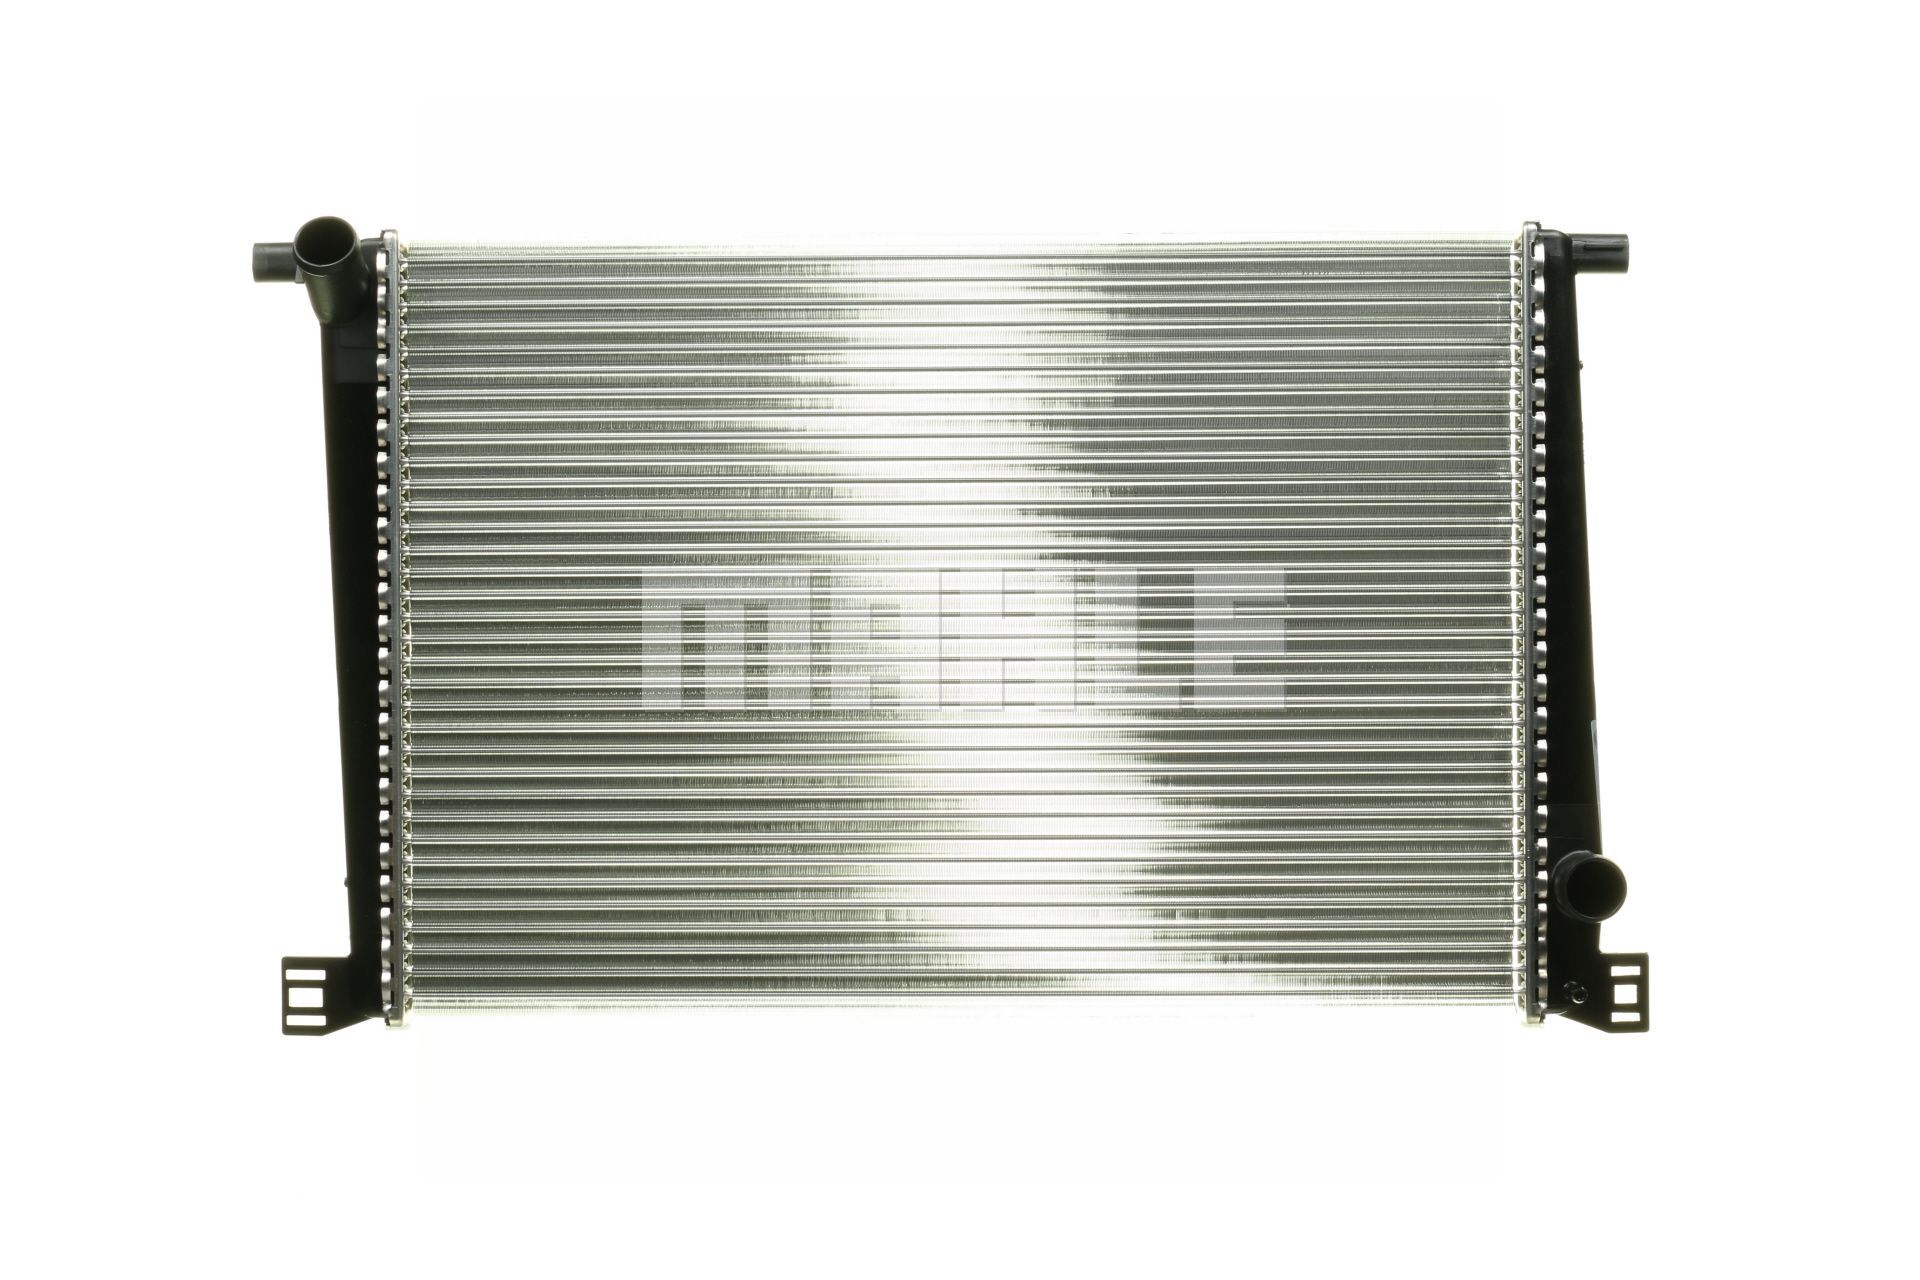 MAHLE ORIGINAL CR 1123 000P Engine radiator for vehicles with/without air conditioning, 600 x 420 x 18 mm, Mechanically jointed cooling fins